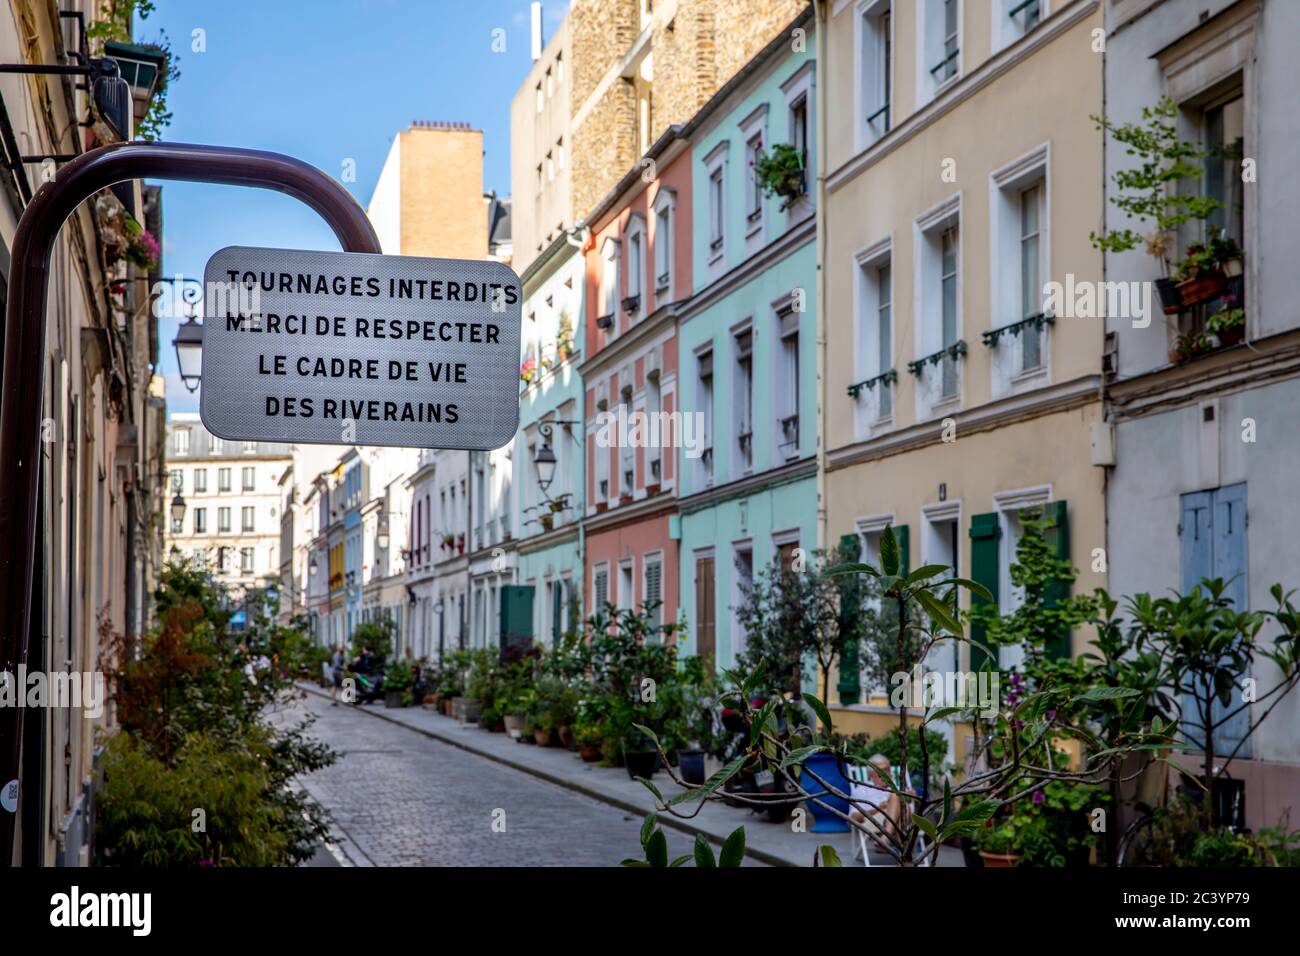 Rue Crémieux, Paris, France - May 19, 2020: Rue Cremieux in the 12th Arrondissement is one of the prettiest residential streets in Paris. Stock Photo